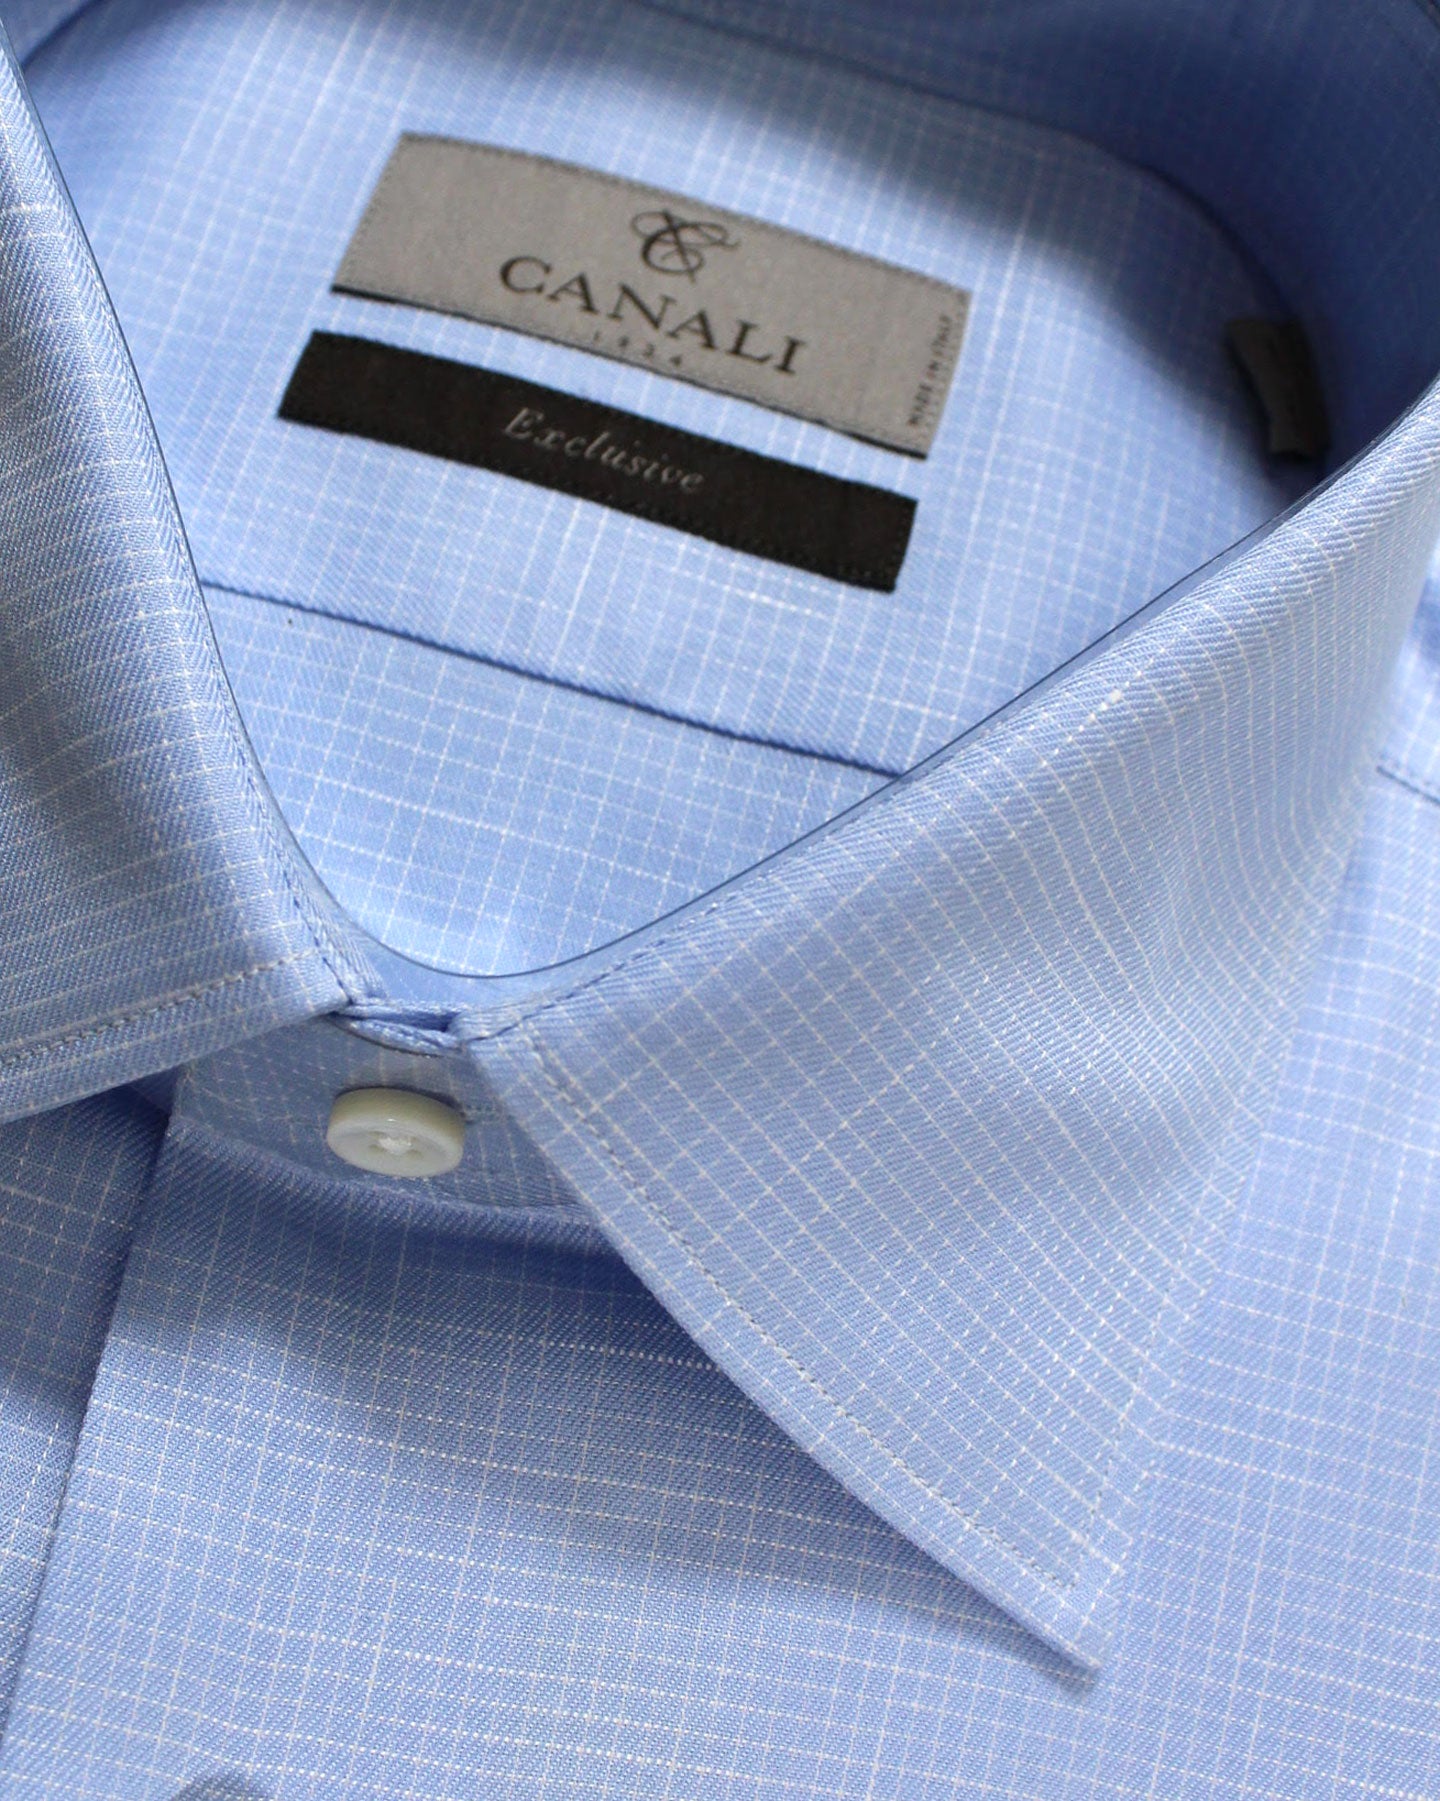 Canali Dress Shirt Exclusive Blue Gingham - Modern Fit 40 - 15 3/4